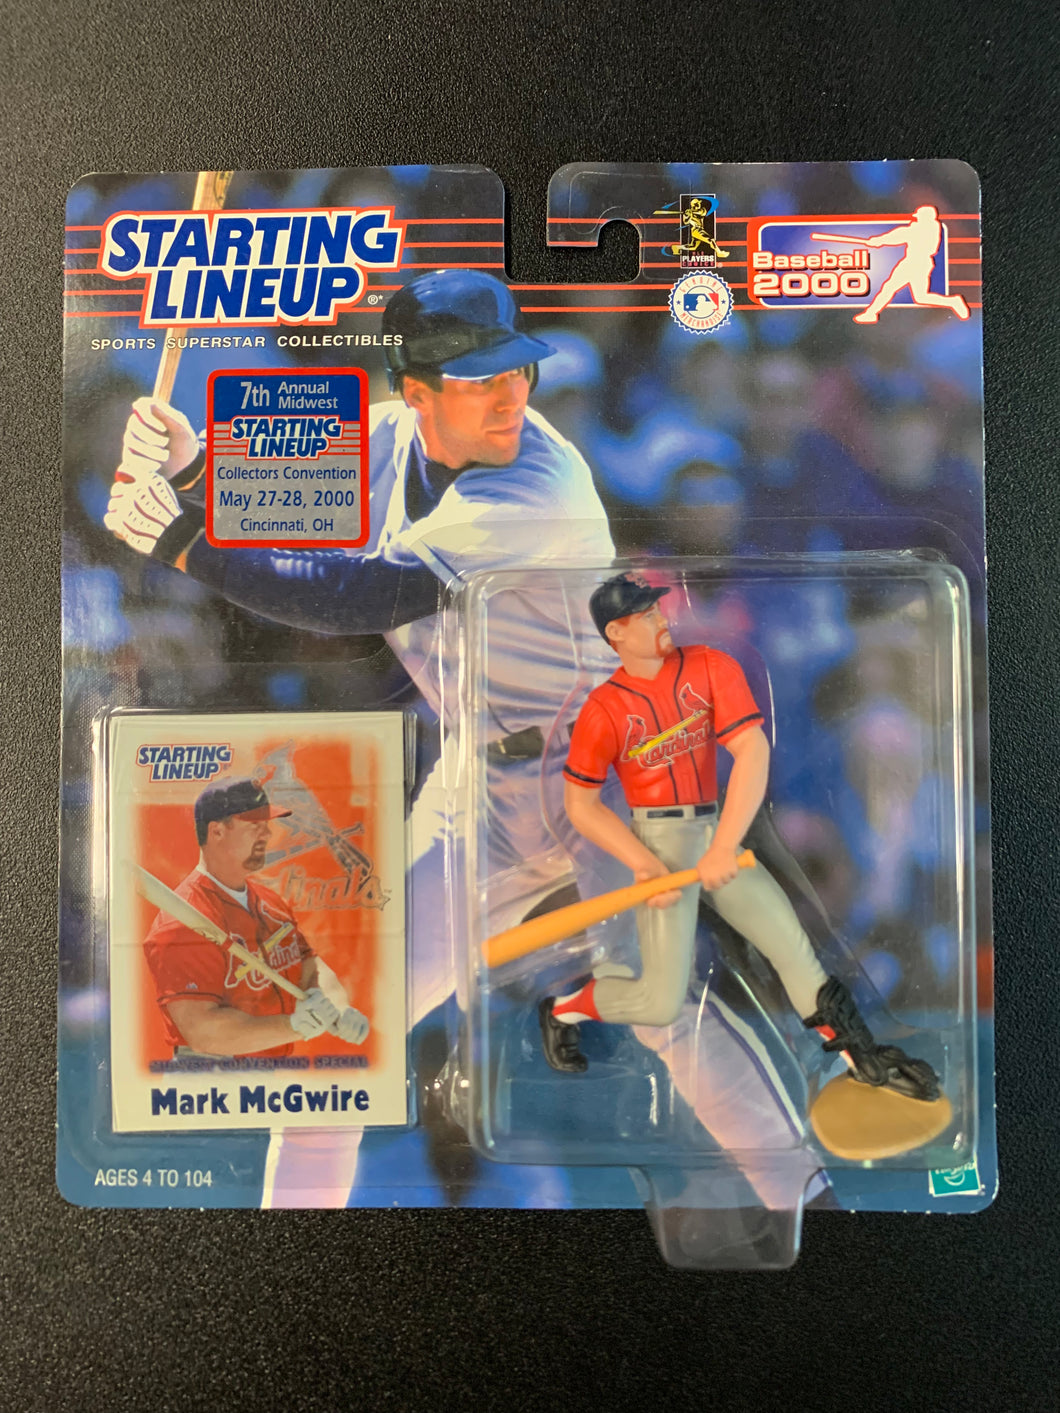 HASBRO STARTING LINEUP BASEBALL 2000 MIDWEST CONVENTION SPECIAL SAINT LOUIS CARDINALS MARK MCGWIRE